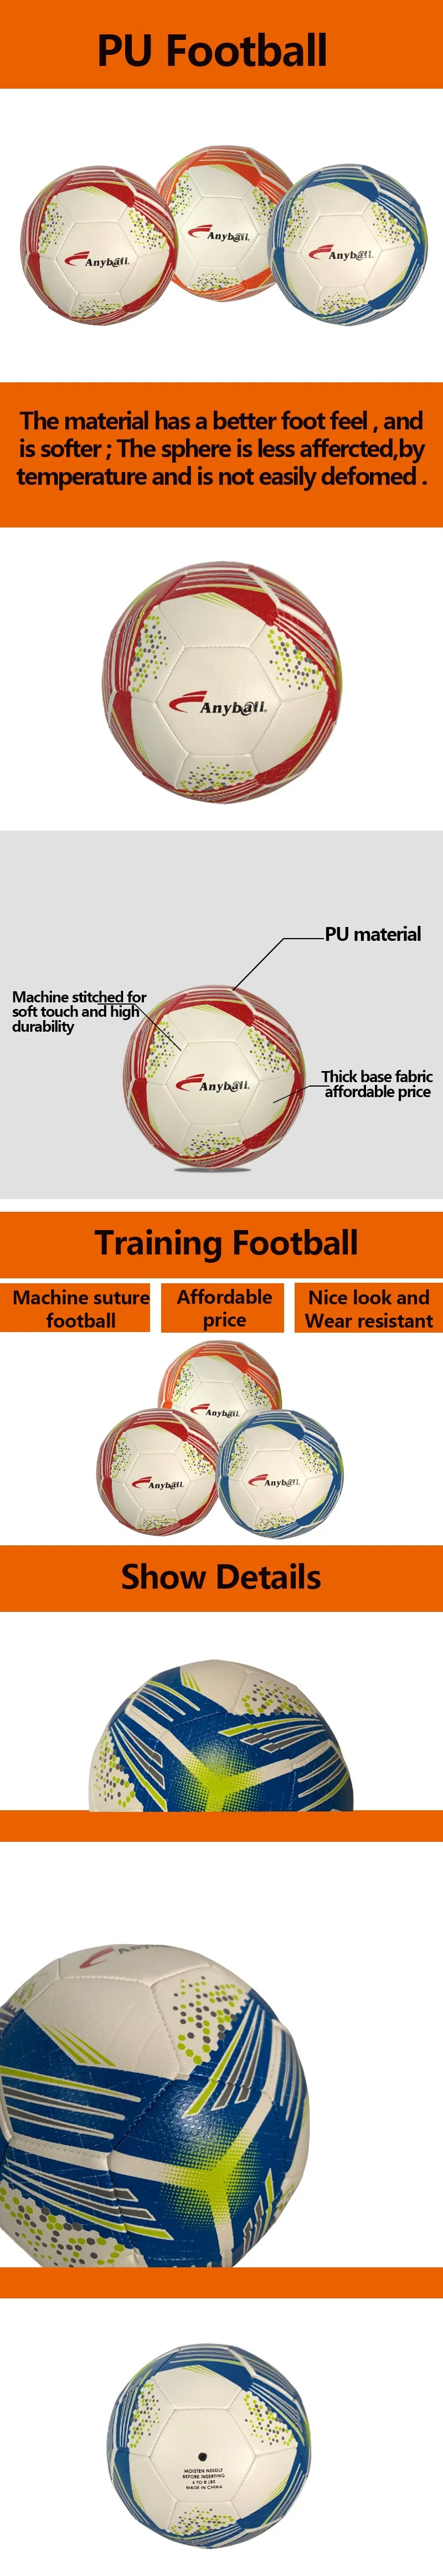 Practice Exercise Soccer Ball Durable Footballs Size 5 Premium Quality Soccer Ball